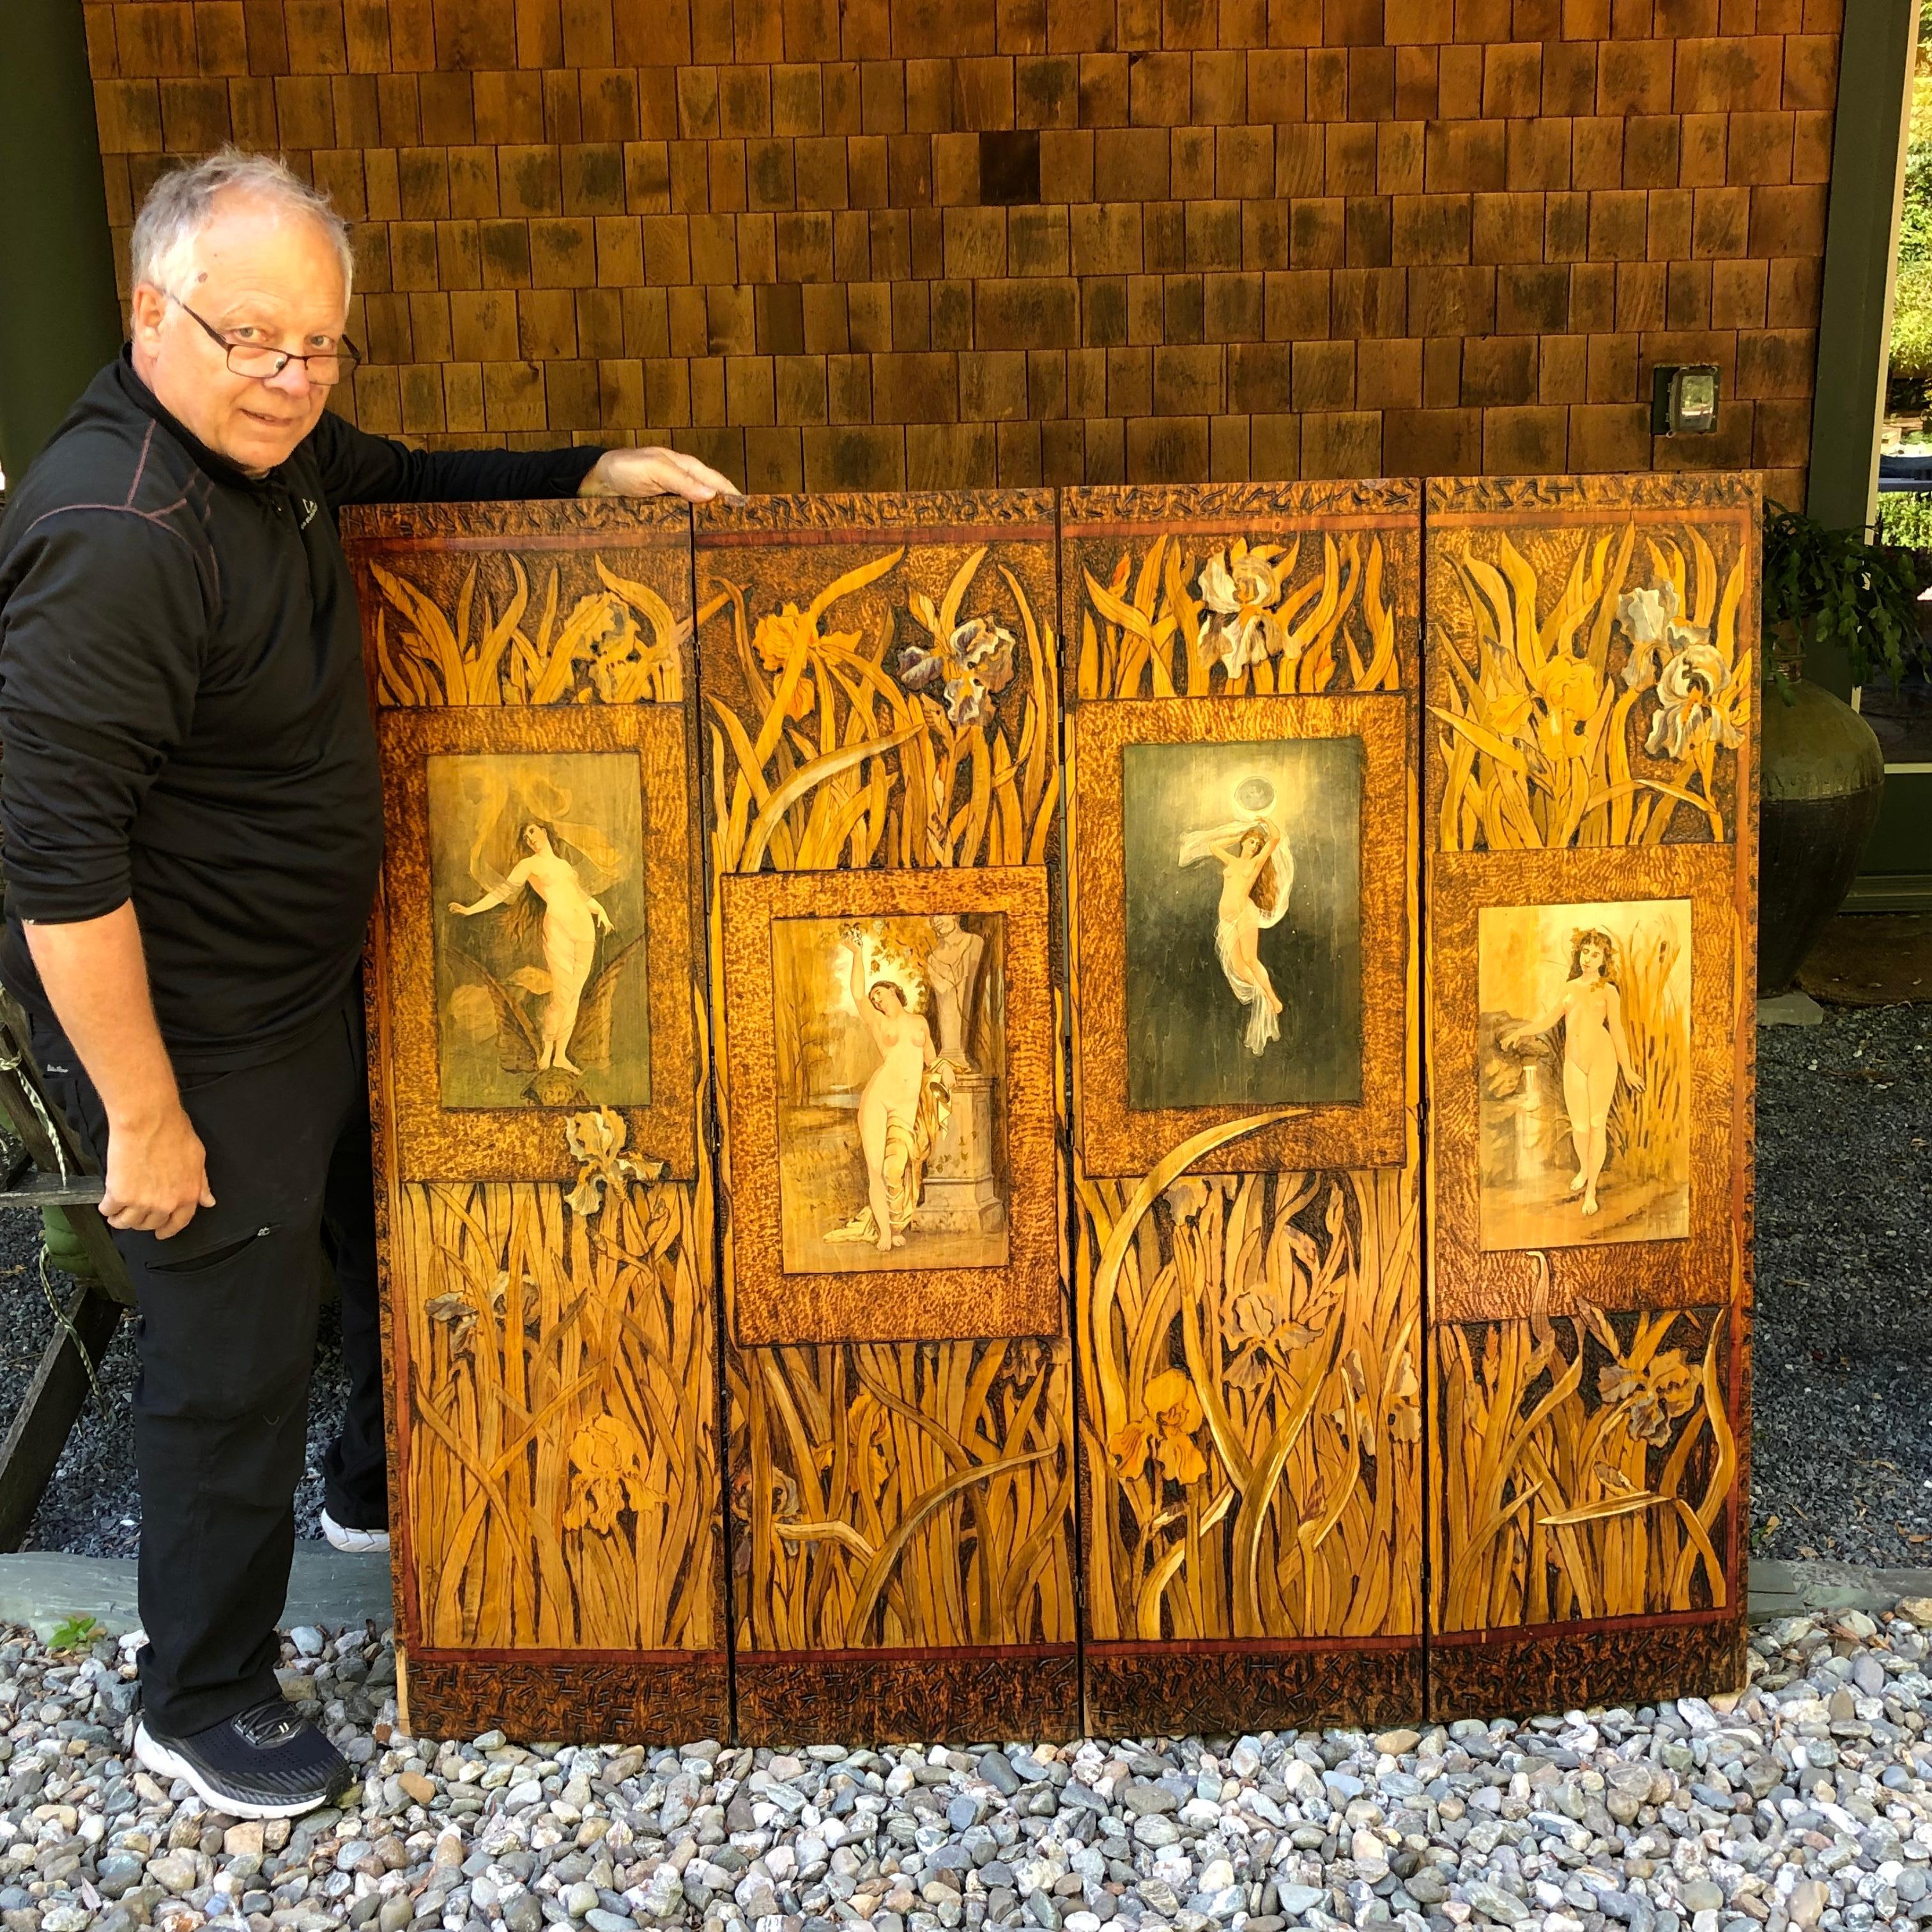 From an important thirty year old New England collection of hand decorated pyrography Arts & Crafts furnishings.

Unique work of art with a Rhode Island origin.

A romantic four panel Screen “Four Seasons”, painting and pyrography on wood